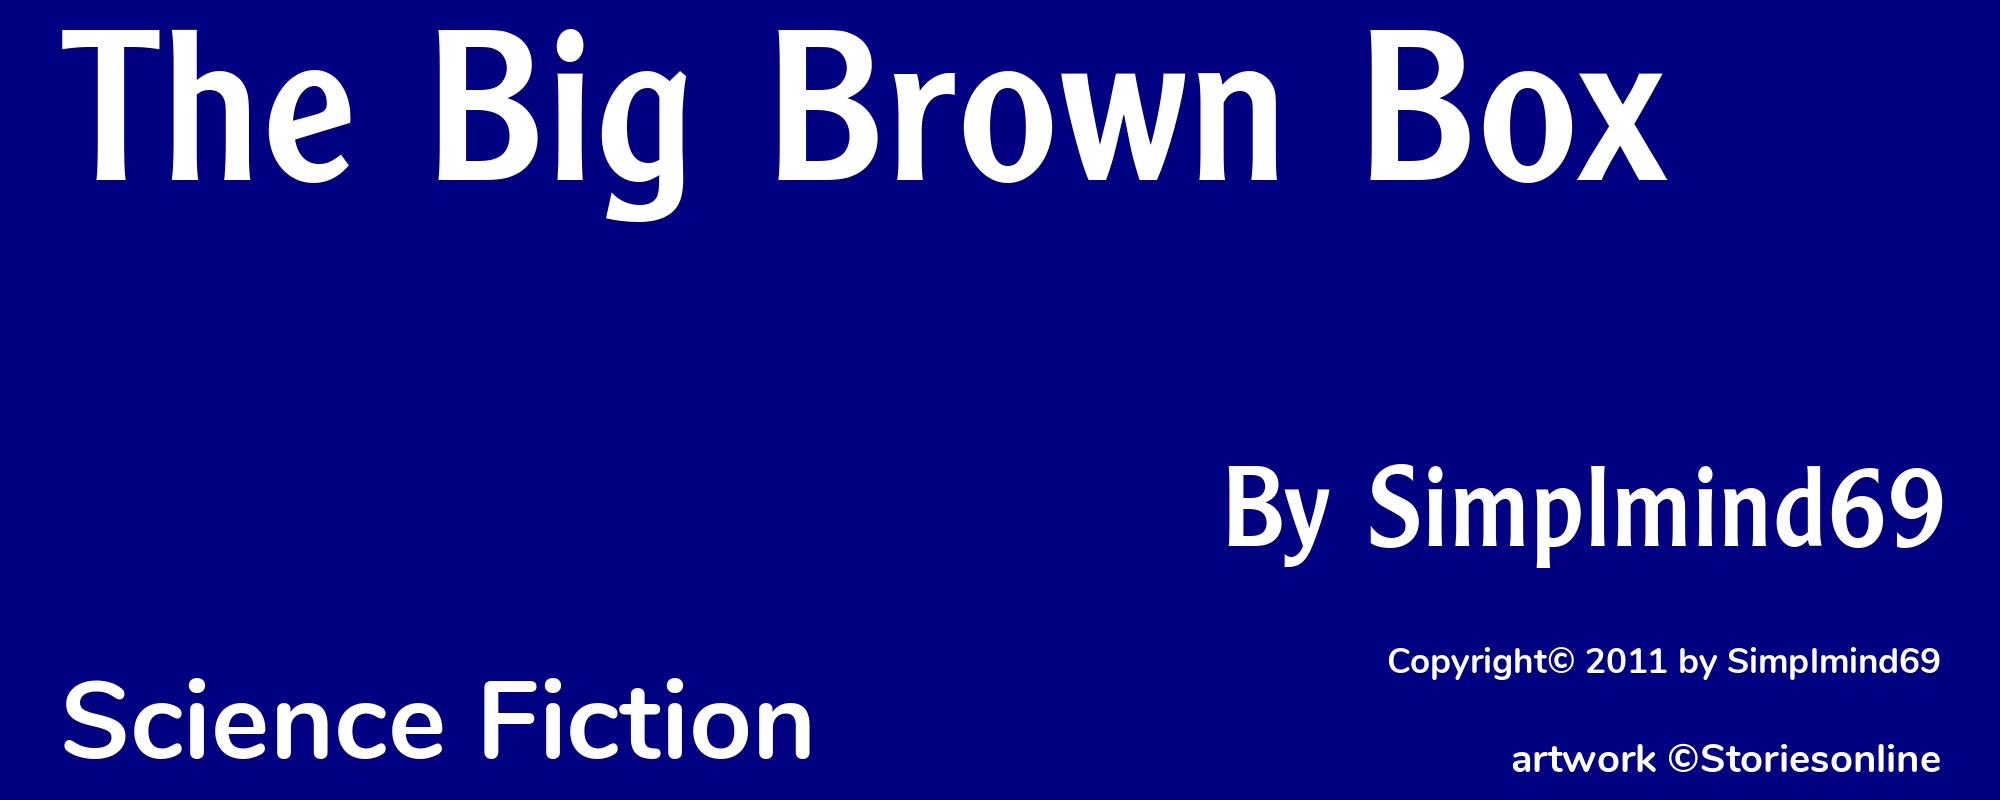 The Big Brown Box - Cover